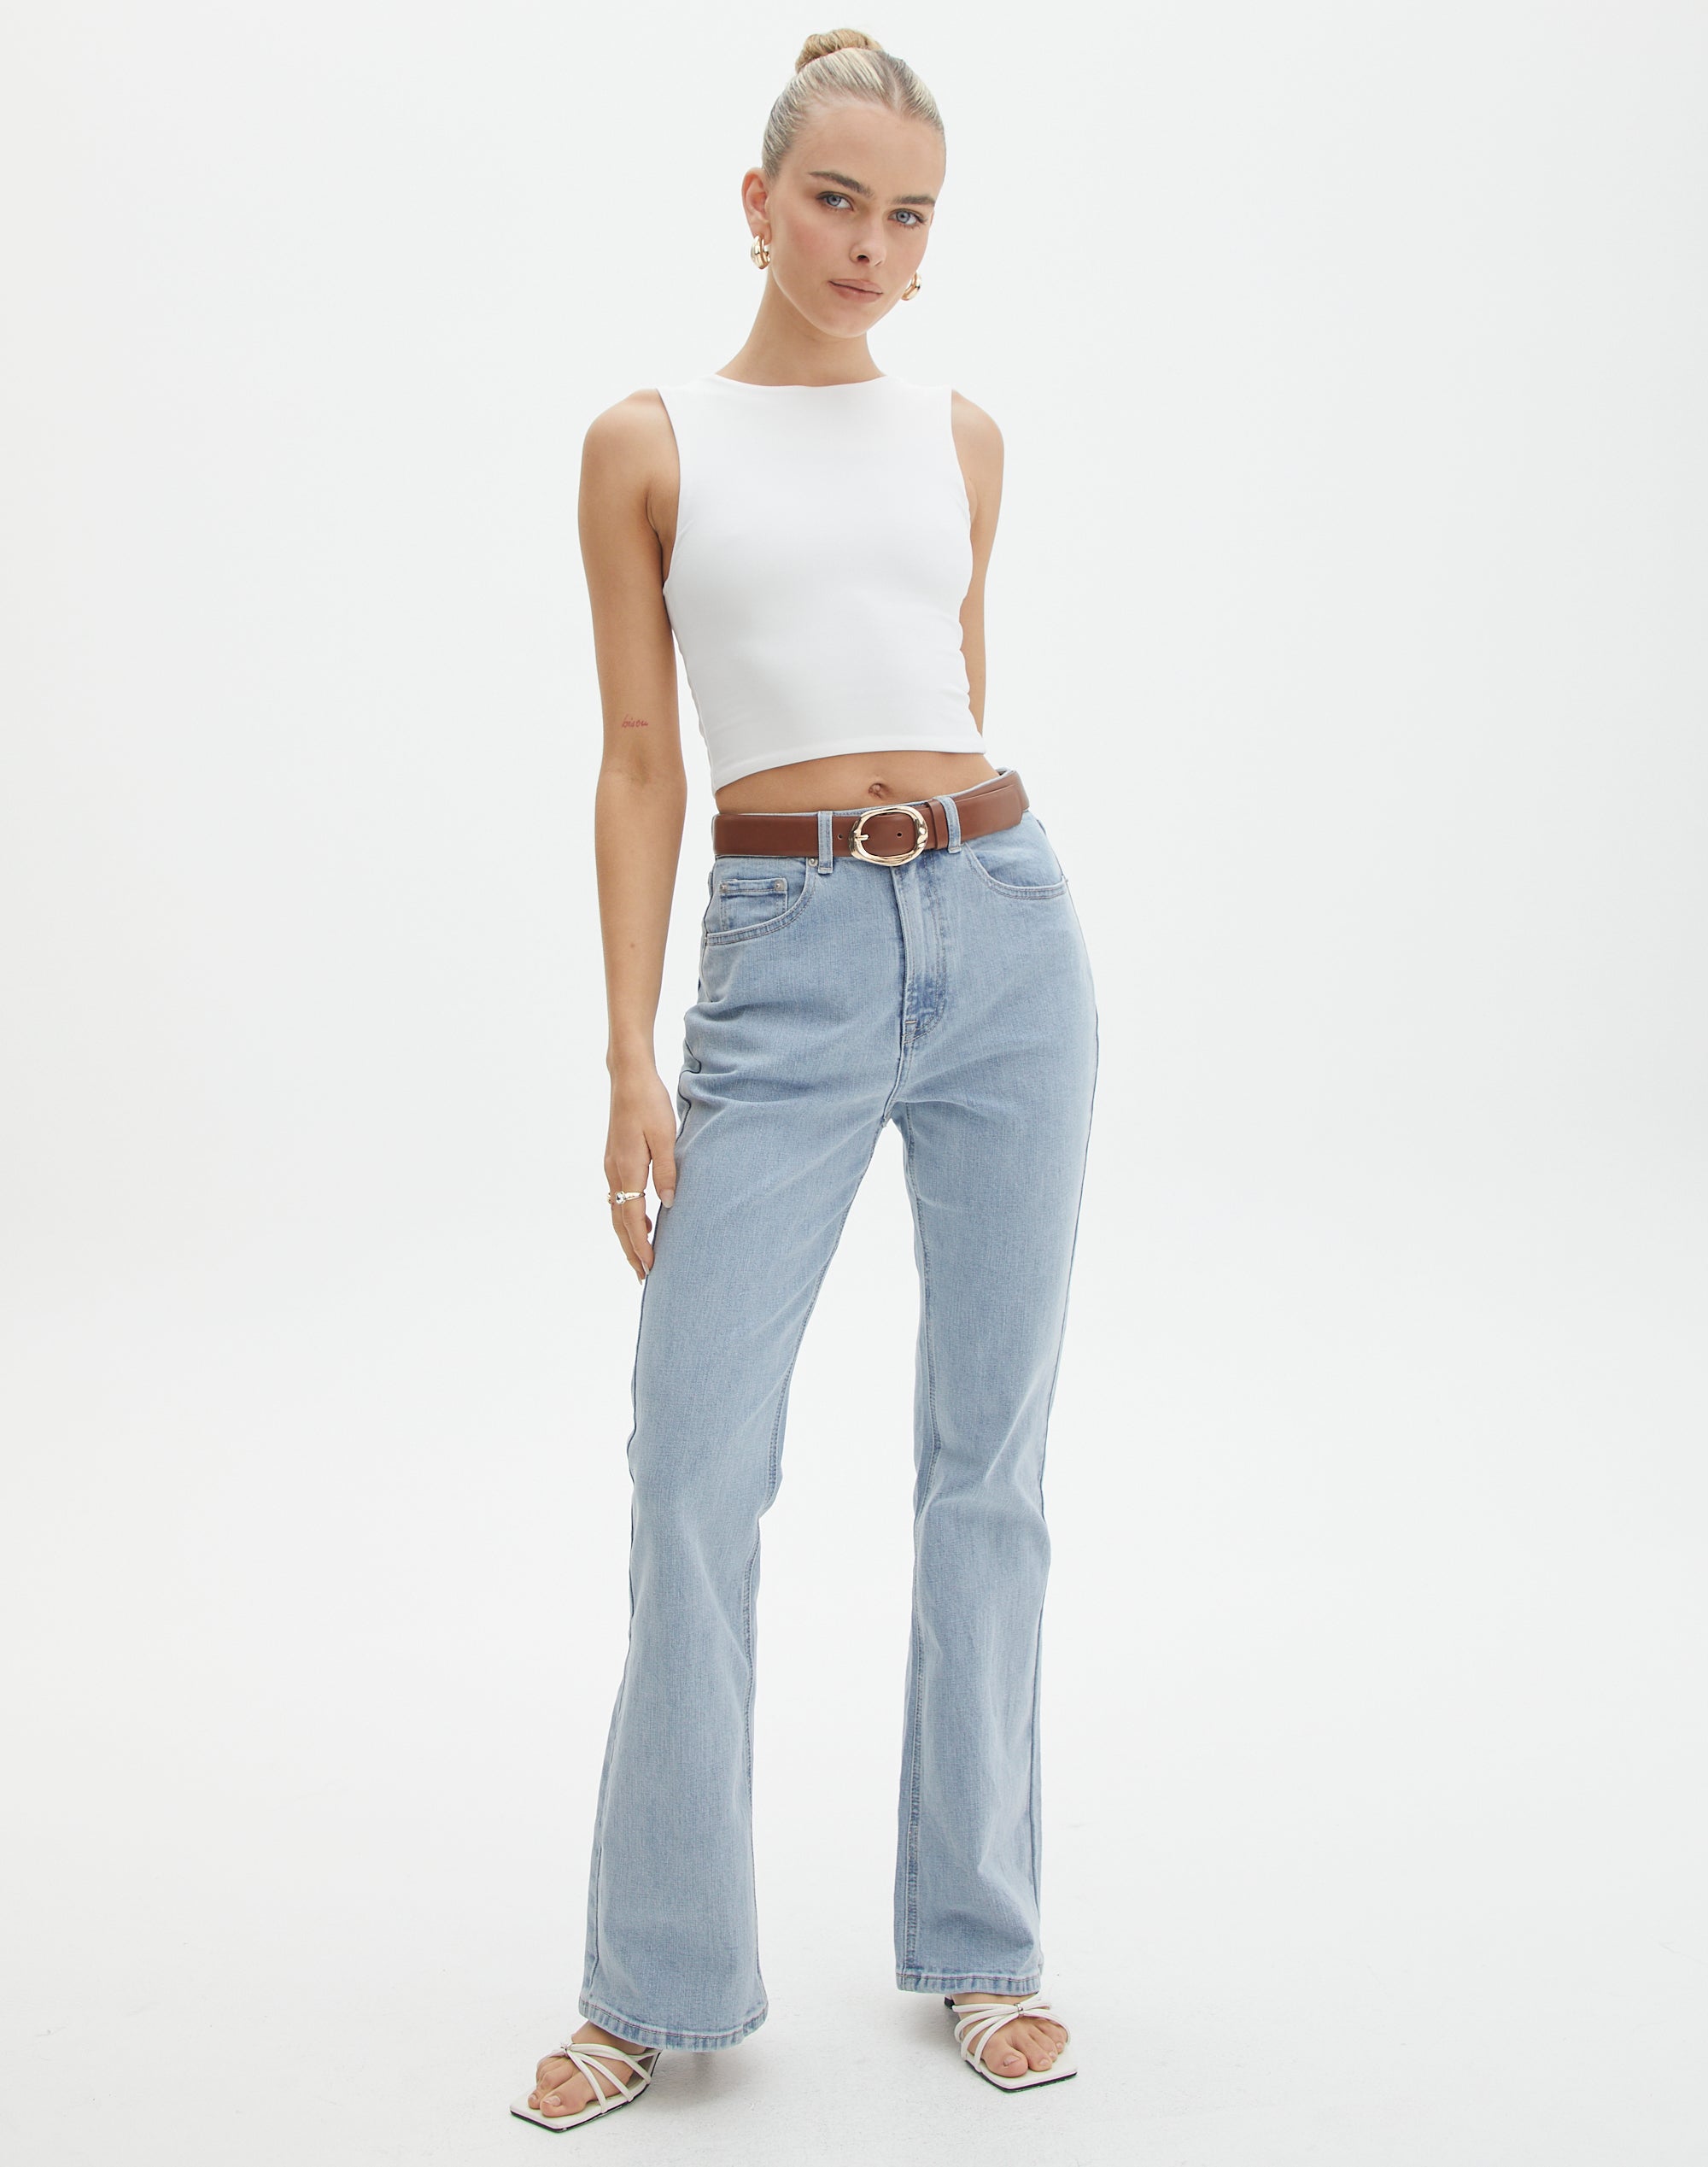 https://www.glassons.com/content/products/faro-jean-justin-ice-wash-front-jd119690dnm.jpg